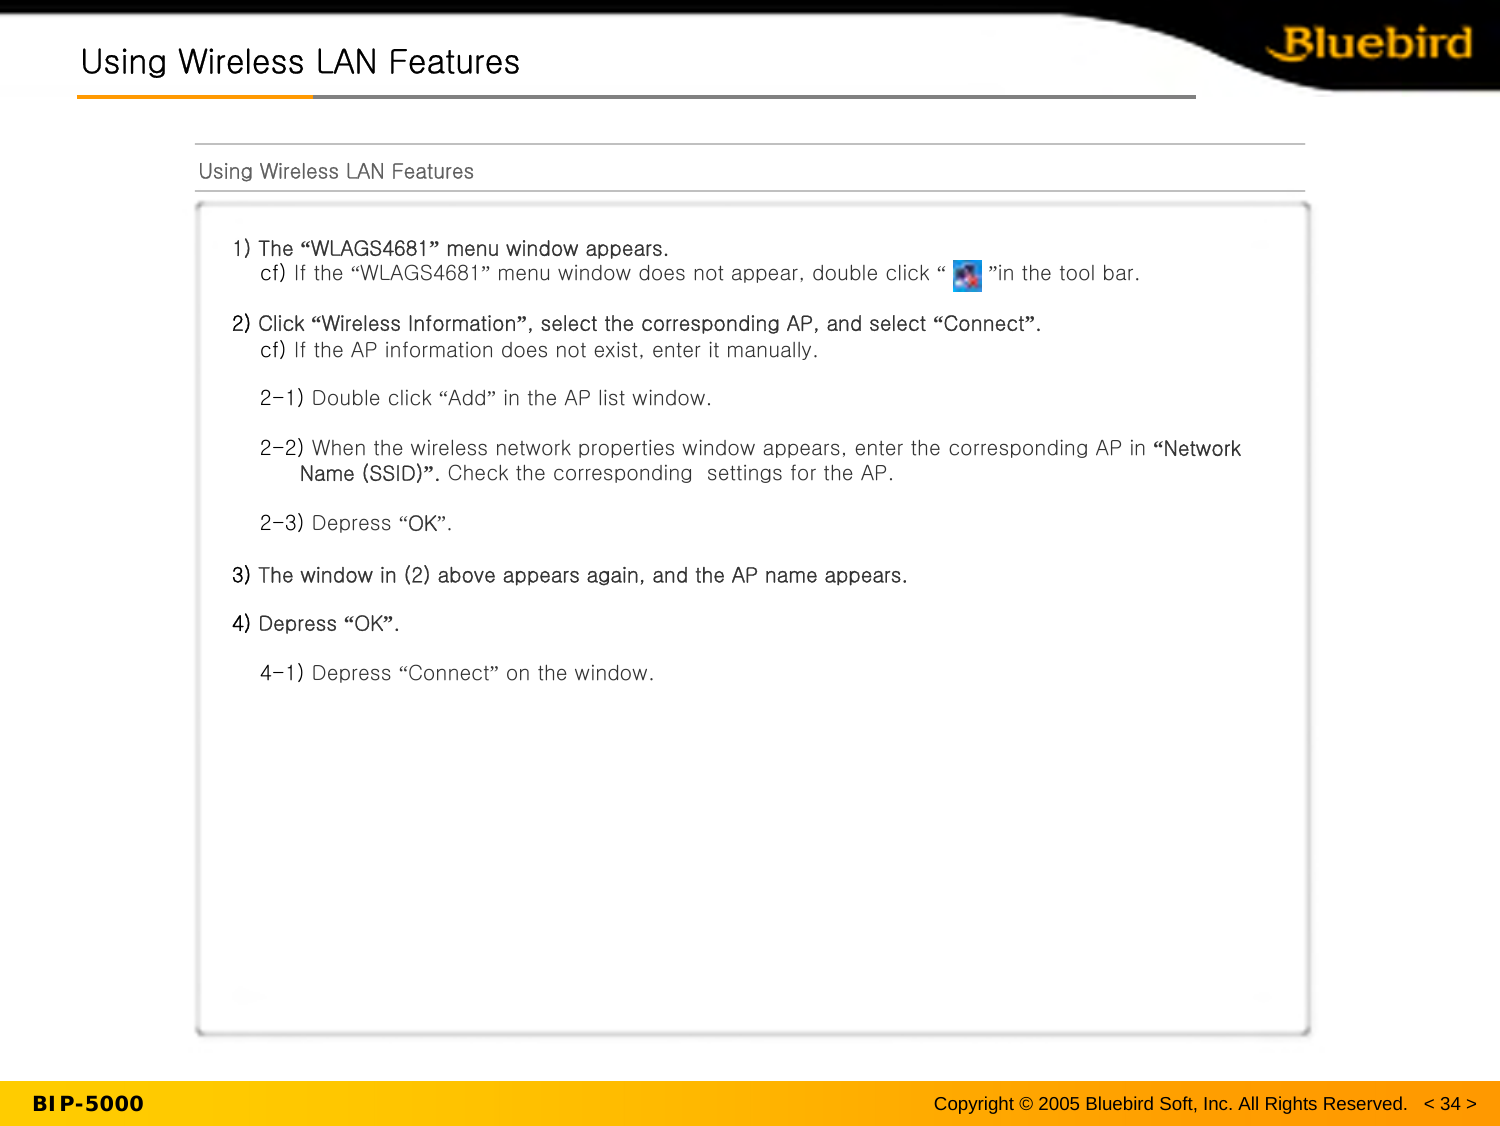 Using Wireless LAN FeaturesUsing Wireless LAN FeaturesUsing Wireless LAN Features1) The “WLAGS4681”menu window appears.cf) If the “WLAGS4681”menu window does not appear, double click “”in the tool bar.2) Click “Wireless Information”, select the corresponding AP, and select “Connect”.cf) If the AP information does not exist, enter it manually. 2-1) Double click “Add”in the AP list window.2-2) When the wireless network properties window appears, enter the corresponding AP in “Network Name (SSID)”.Check the corresponding  settings for the AP.2-3) Depress “OK”.3) The window in (2) above appears again, and the AP name appears.4) Depress “OK”.4-1) Depress “Connect”on the window.BIP-5000 Copyright © 2005 Bluebird Soft, Inc. All Rights Reserved.   &lt; 34 &gt;